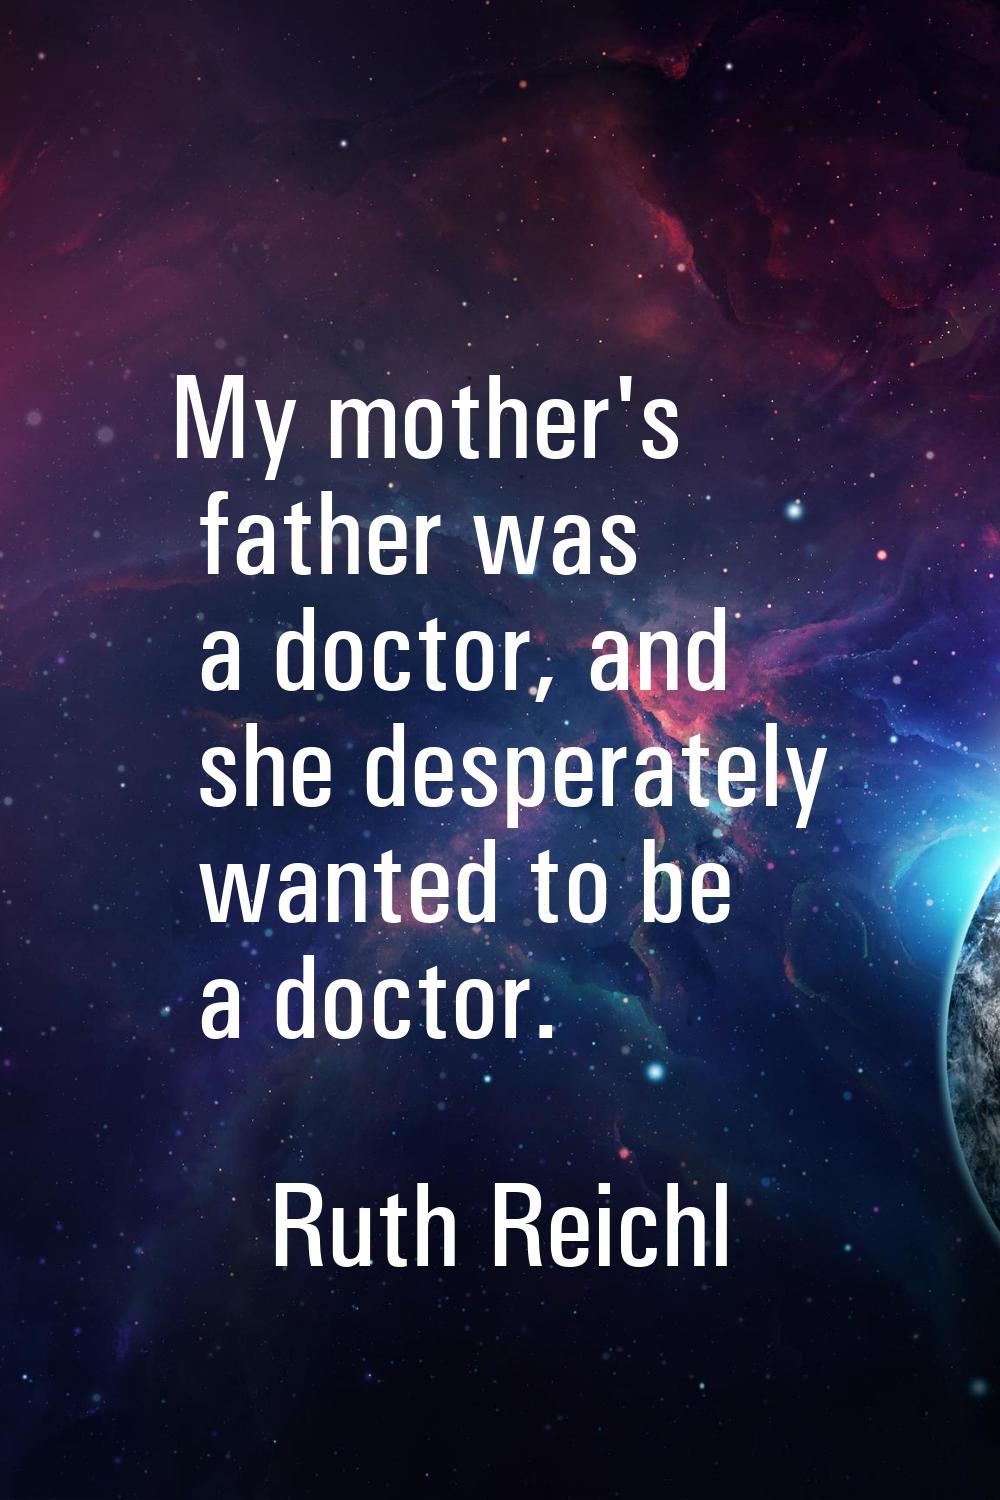 My mother's father was a doctor, and she desperately wanted to be a doctor.